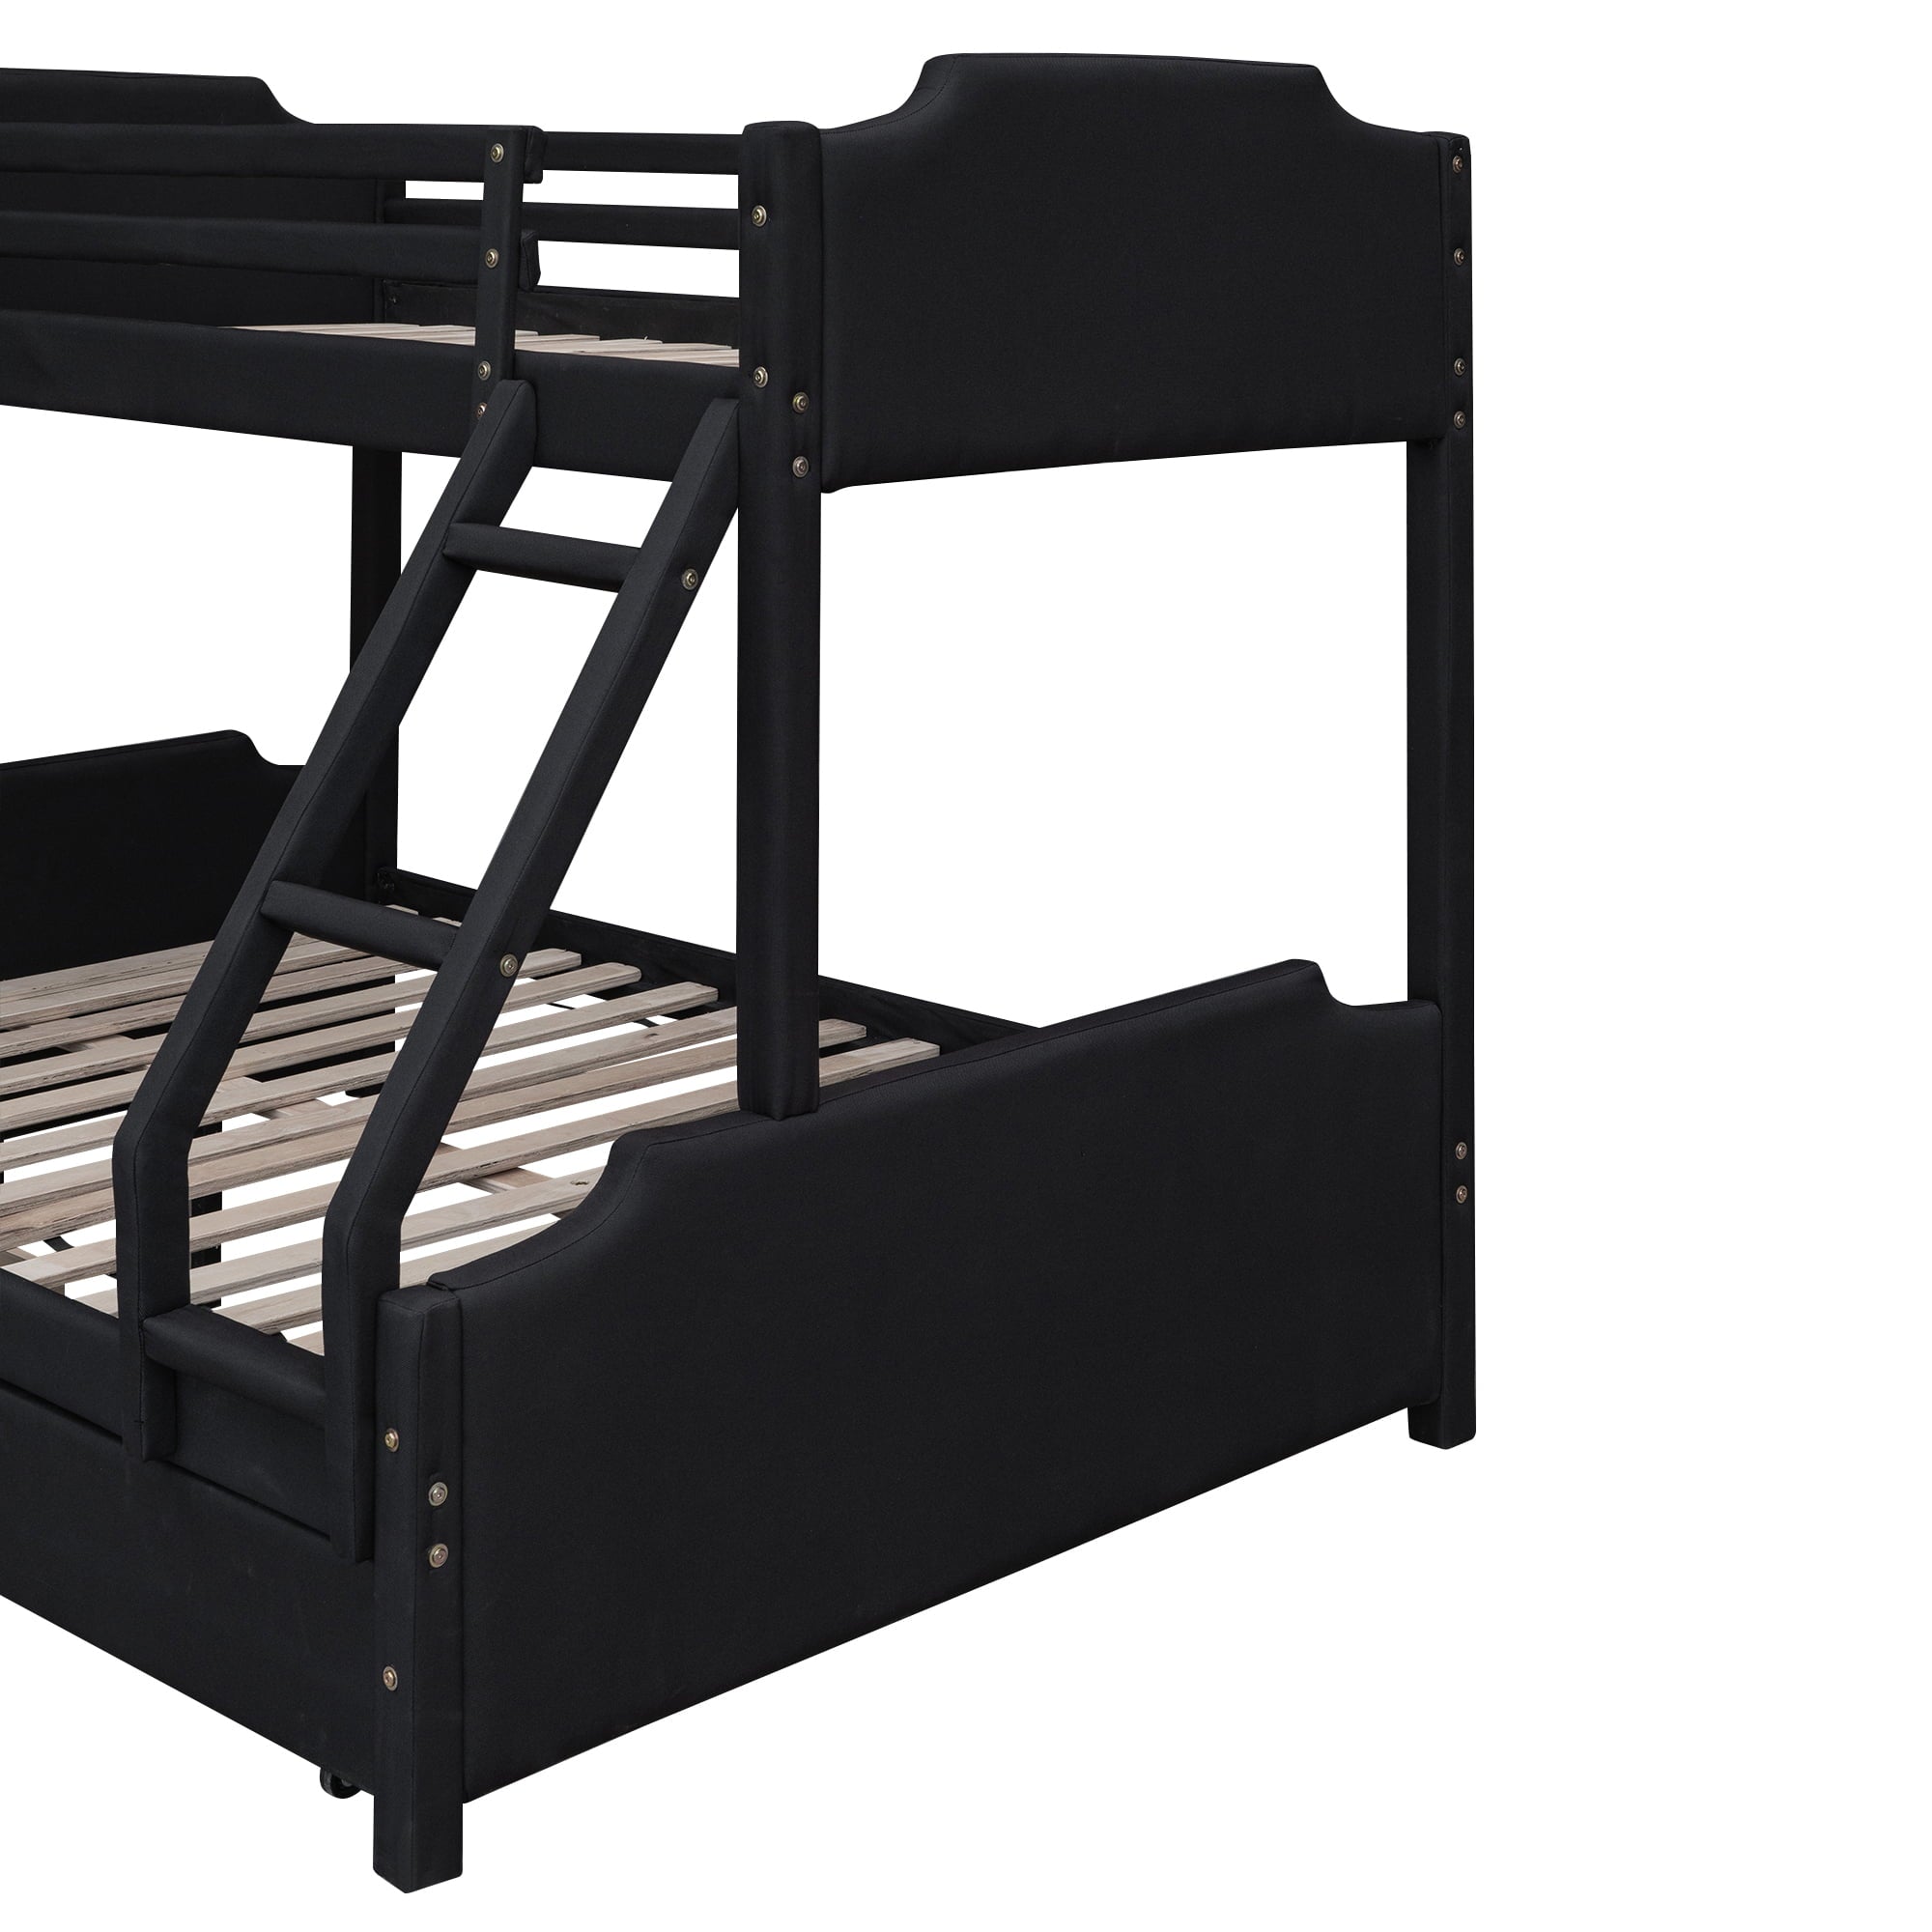 EUROCO Upholstery Twin over Full Bunk Bed with Slide and Drawers for Kids Room, Black